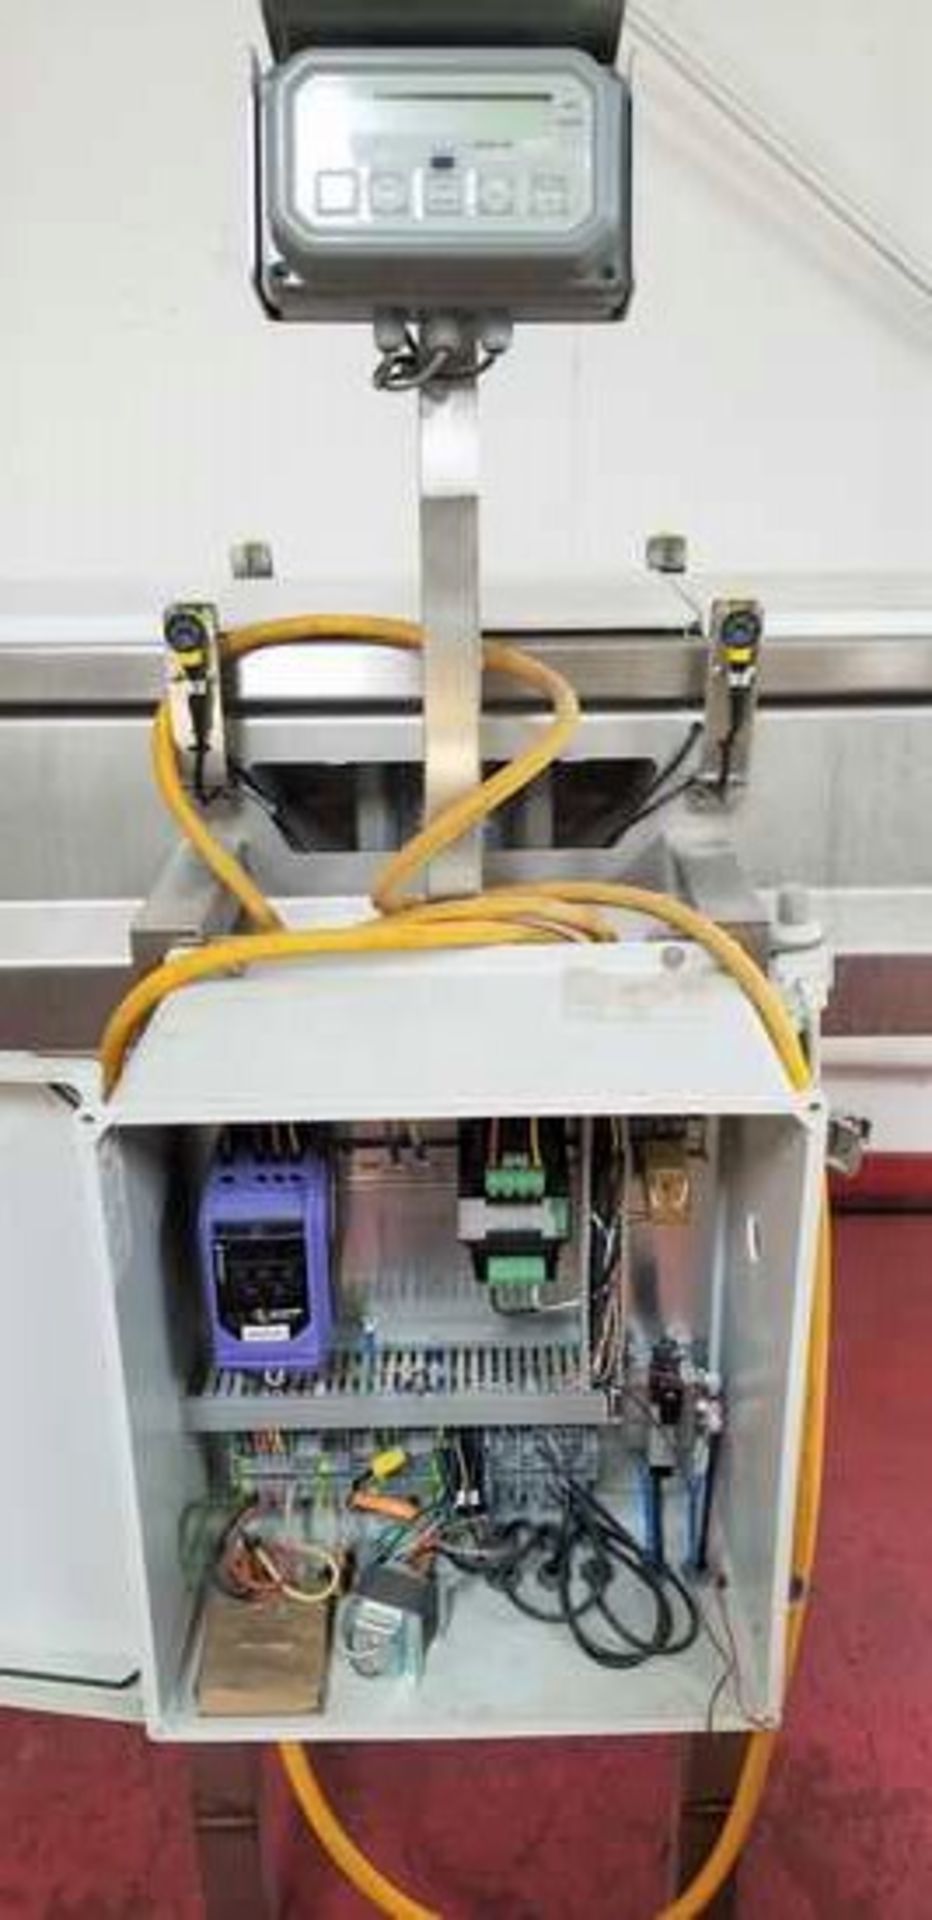 InMotion Scale Conveyor. WeighTech Micro Weigh display head. S/S Drum Drive on conveyor. No belt. - Image 3 of 3